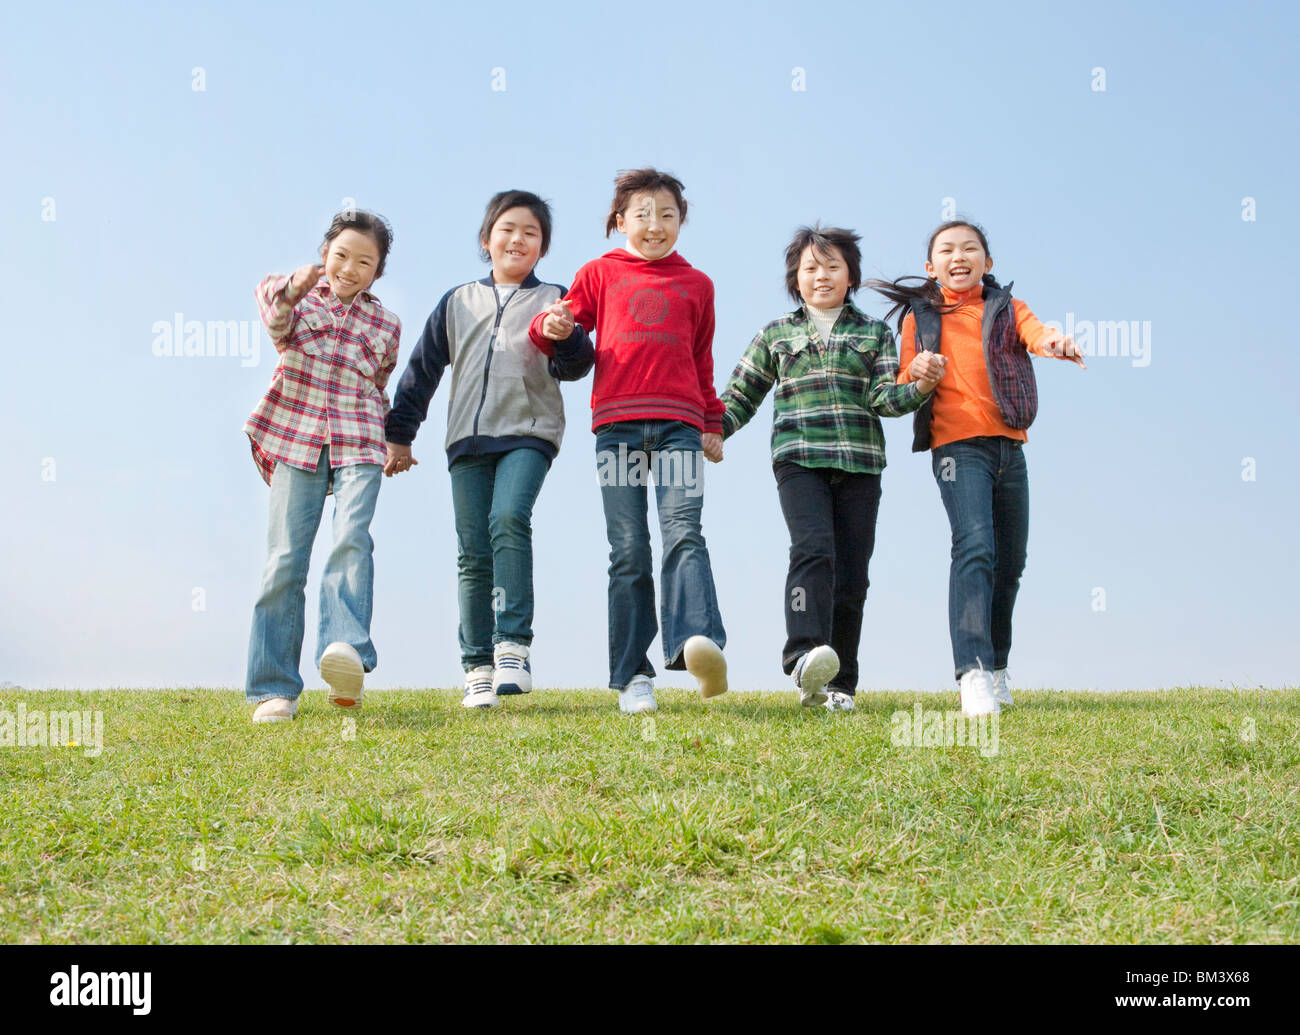 Boys and Girls Holding Hands, Walking Down Together Stock Photo